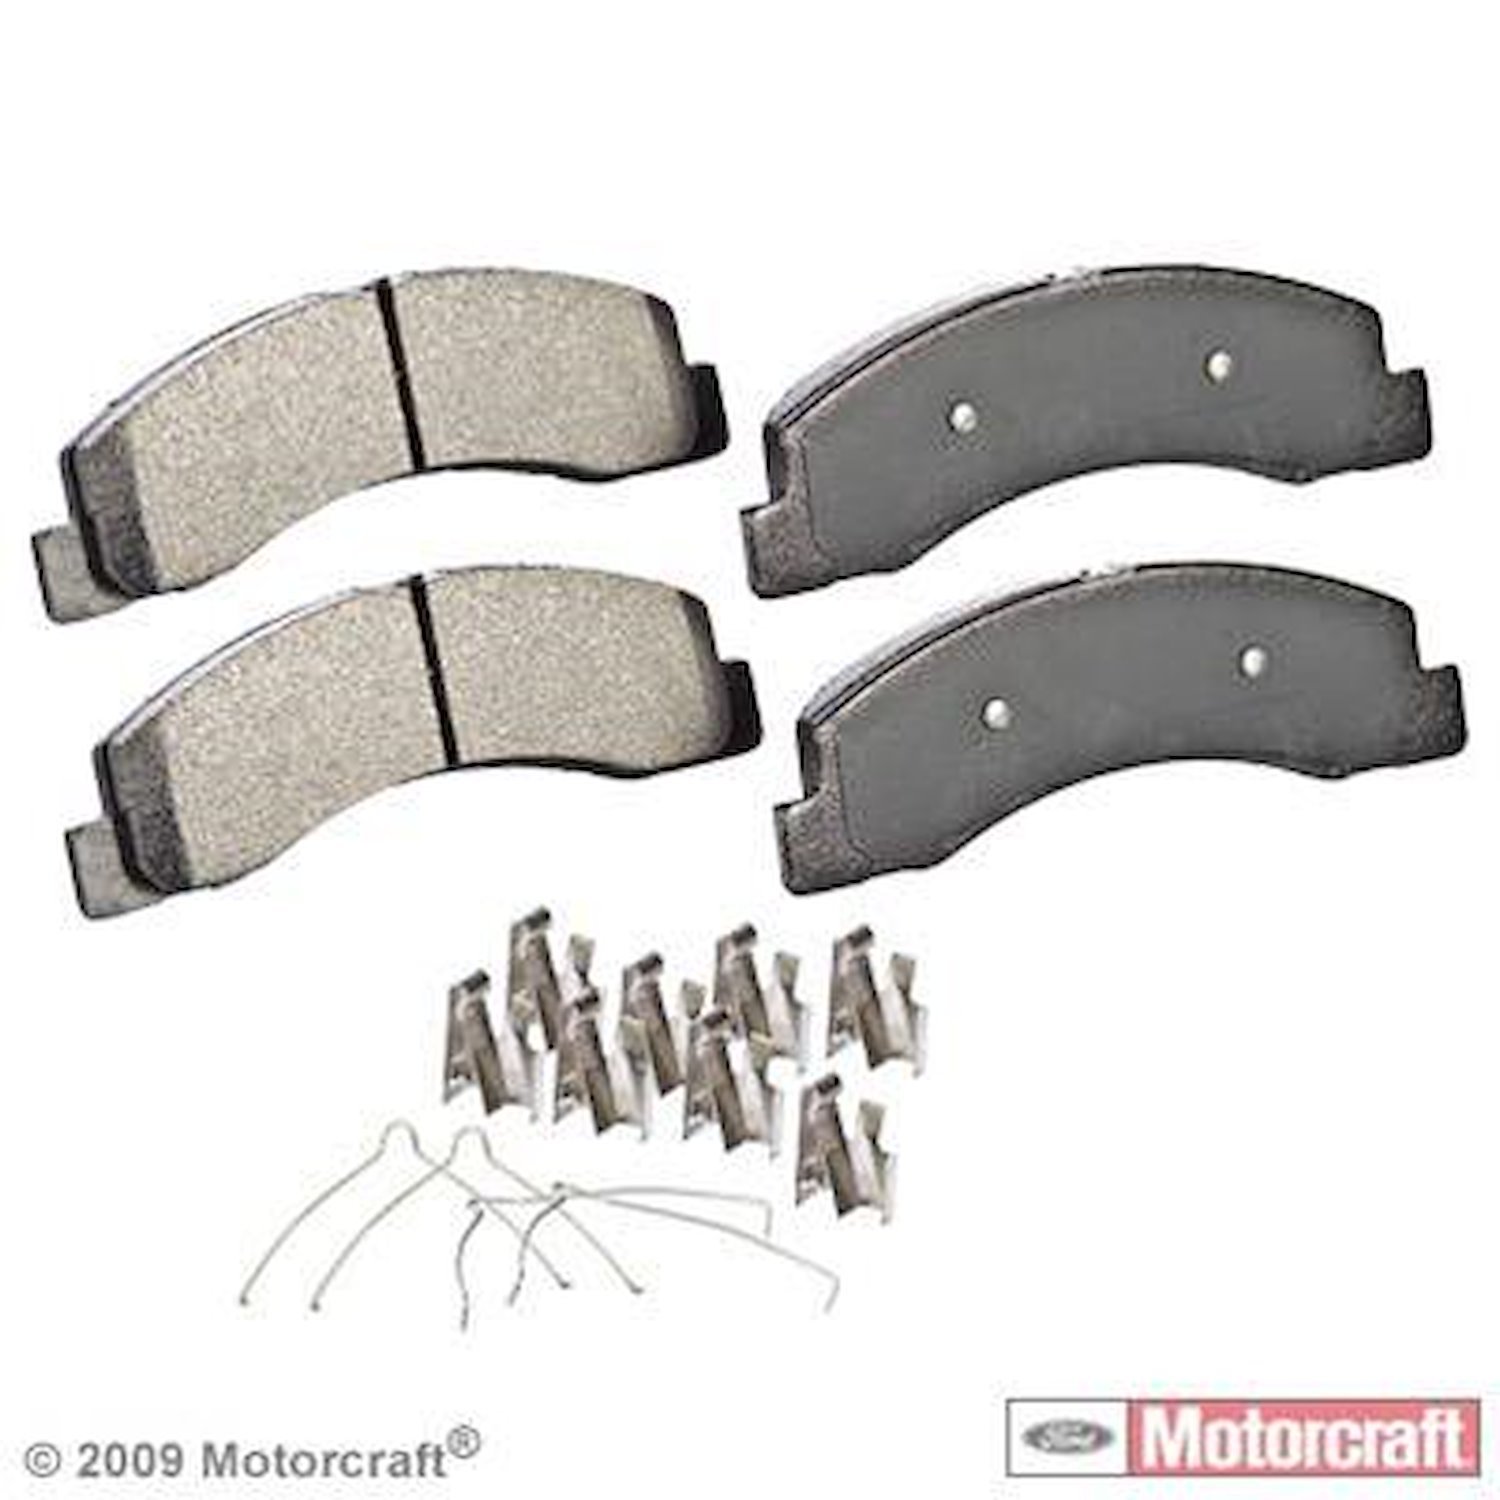 Disc Brake Pad Set [Front] Fits Select 1999-2005 Ford SUV, Truck